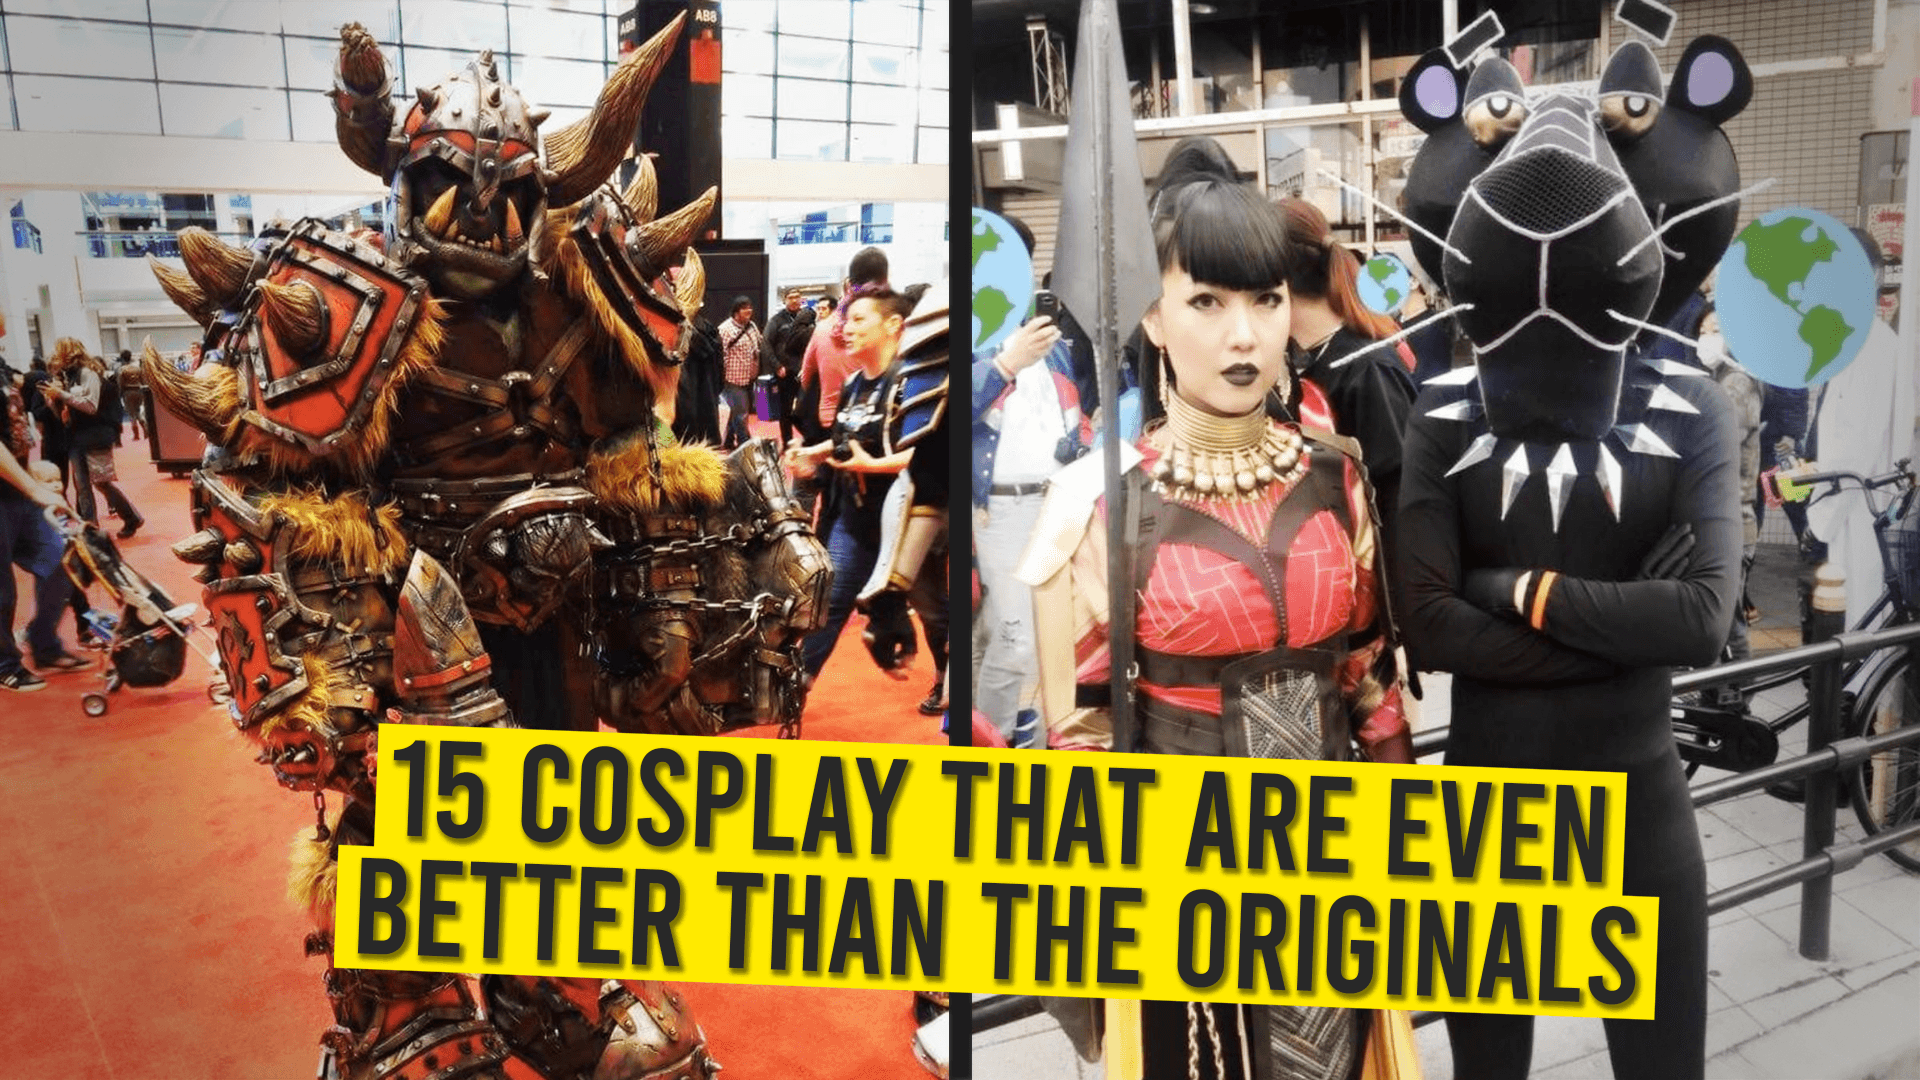 15 Cosplay That Are Even Better than the Originals.